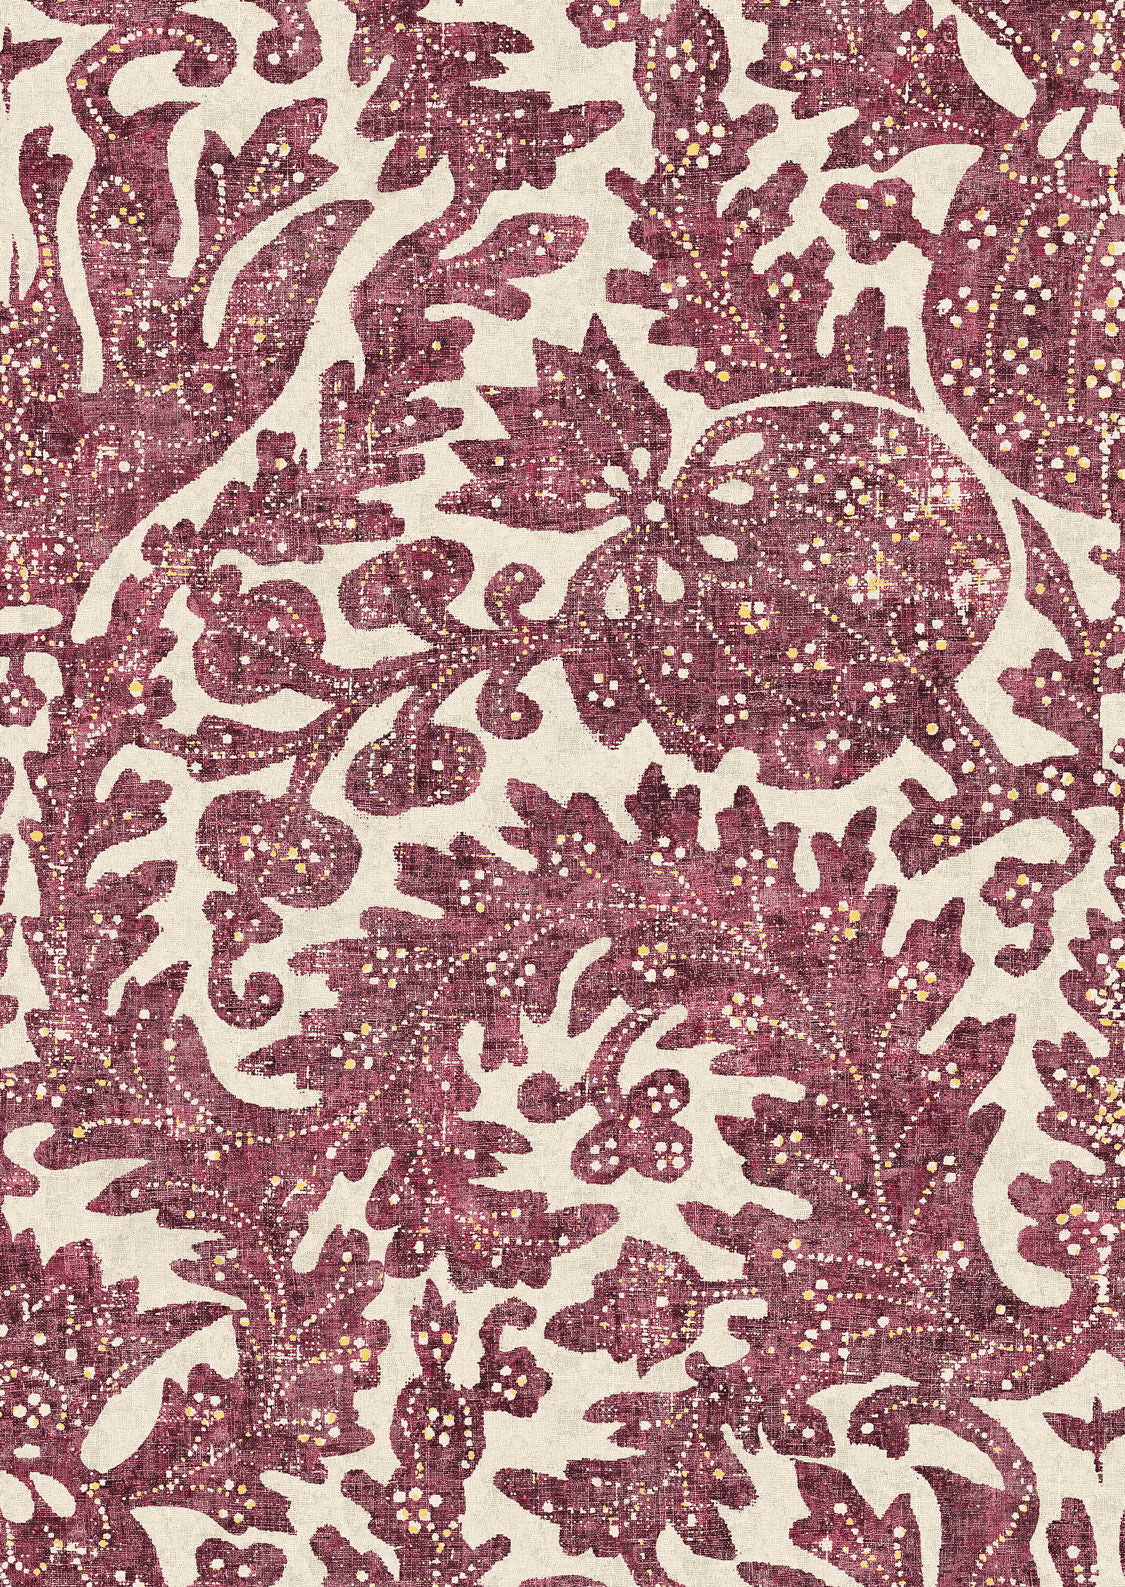 Pomegranate Wallpaper - Red - Lewis & Wood